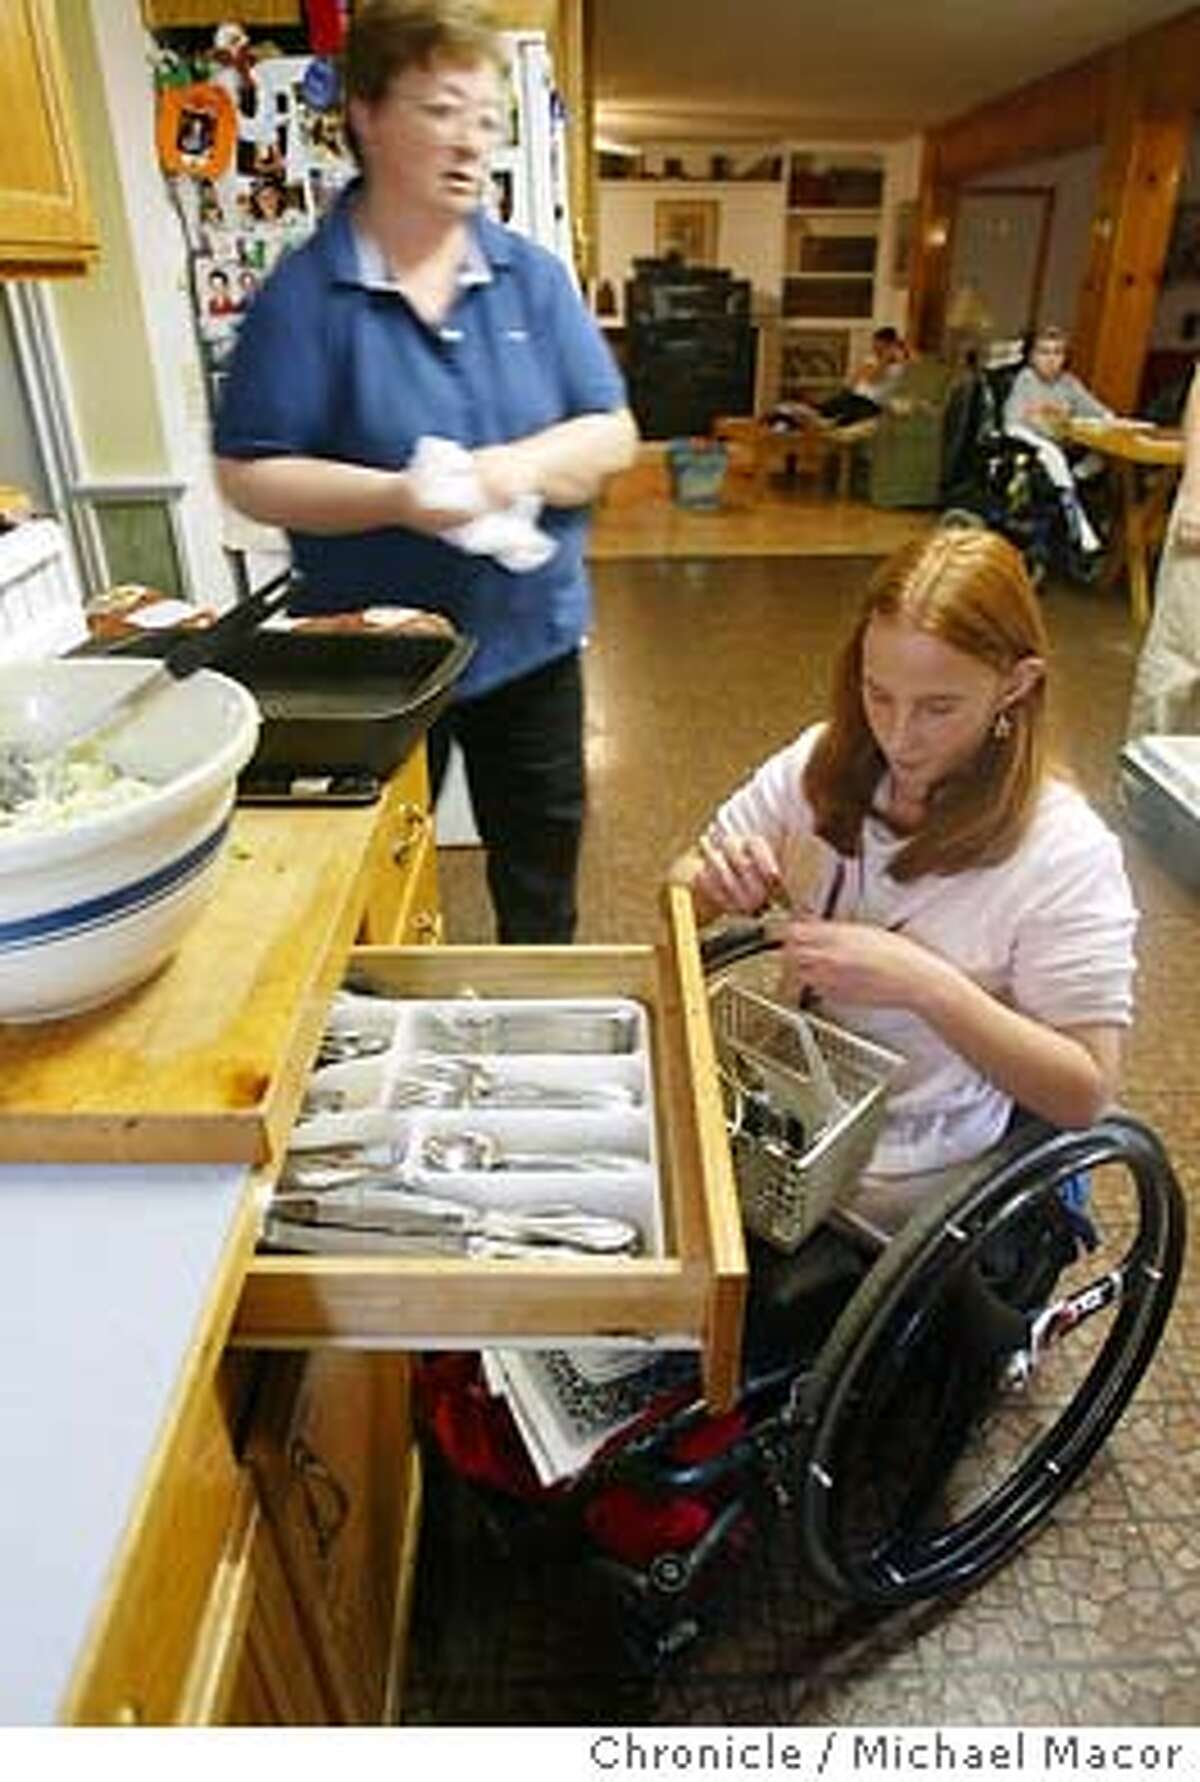 Most everyone helps out around the house and dinner time. Xenia,16 empties the dishwasher, putting away silverware. Susan Tom of Fairfield, has taken 9 disabled children into her home. Jonathan Karsh the former host of Evening Magazine, completed a documentary film on their lives . The film has received awards at the Sundance Film Festival as well as being included in the short list, (top 12 films) being considered as oscar contenders. 11/18/03 in Fairfield. MICHAEL MACOR/ The Chronicle Susan Tom puts her arm around 8-year-old Faith, who suffered severe burns when she was a baby.